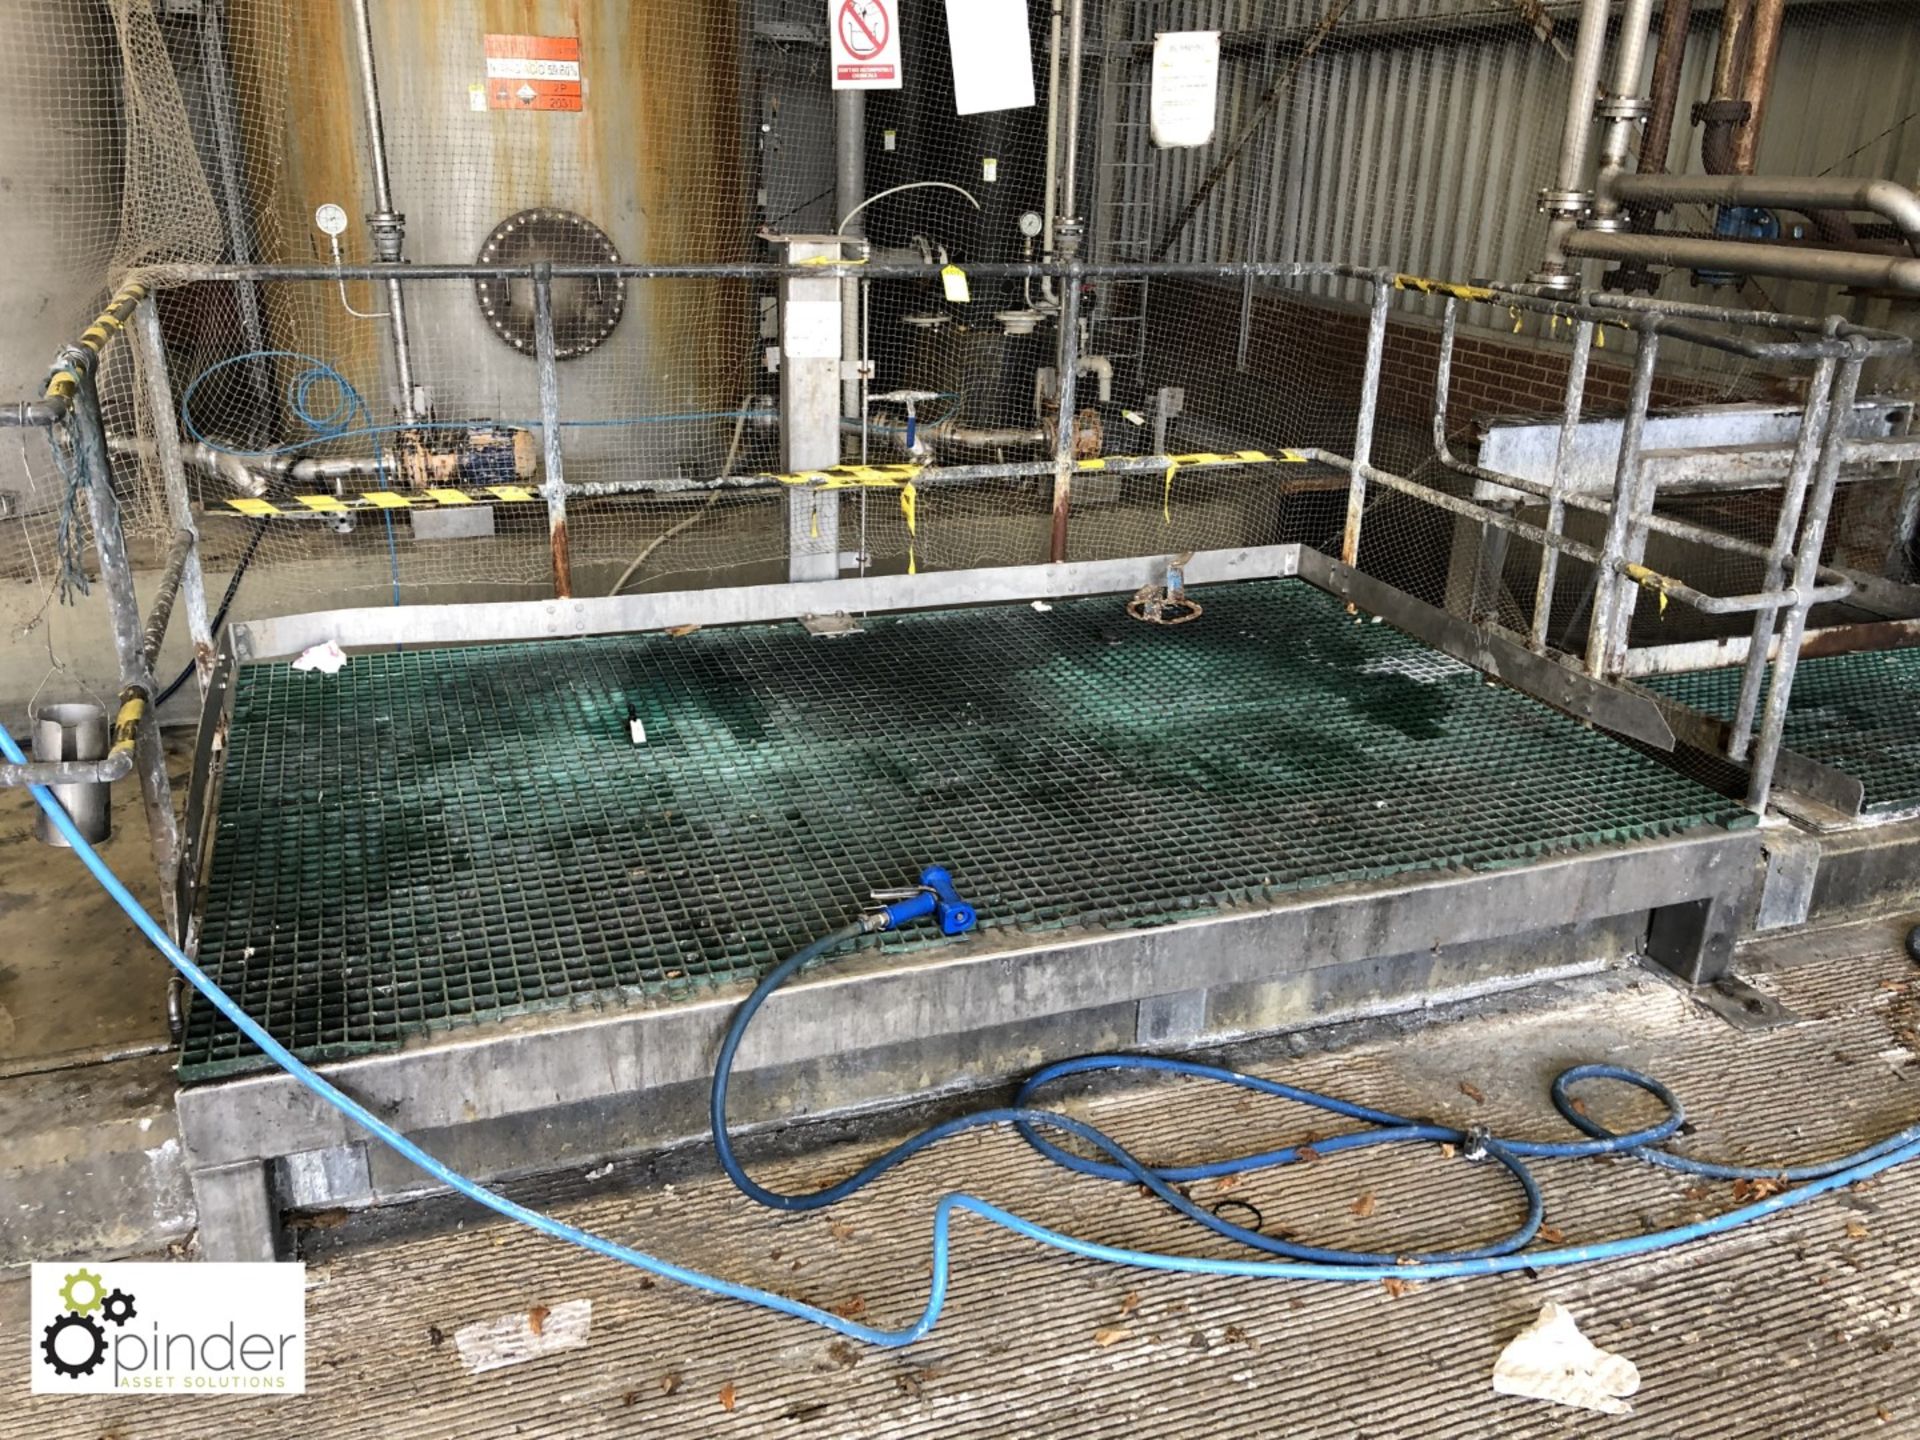 Stainless steel IBC Wash Station, with hose (please note there is a lift out charge of £50 plus